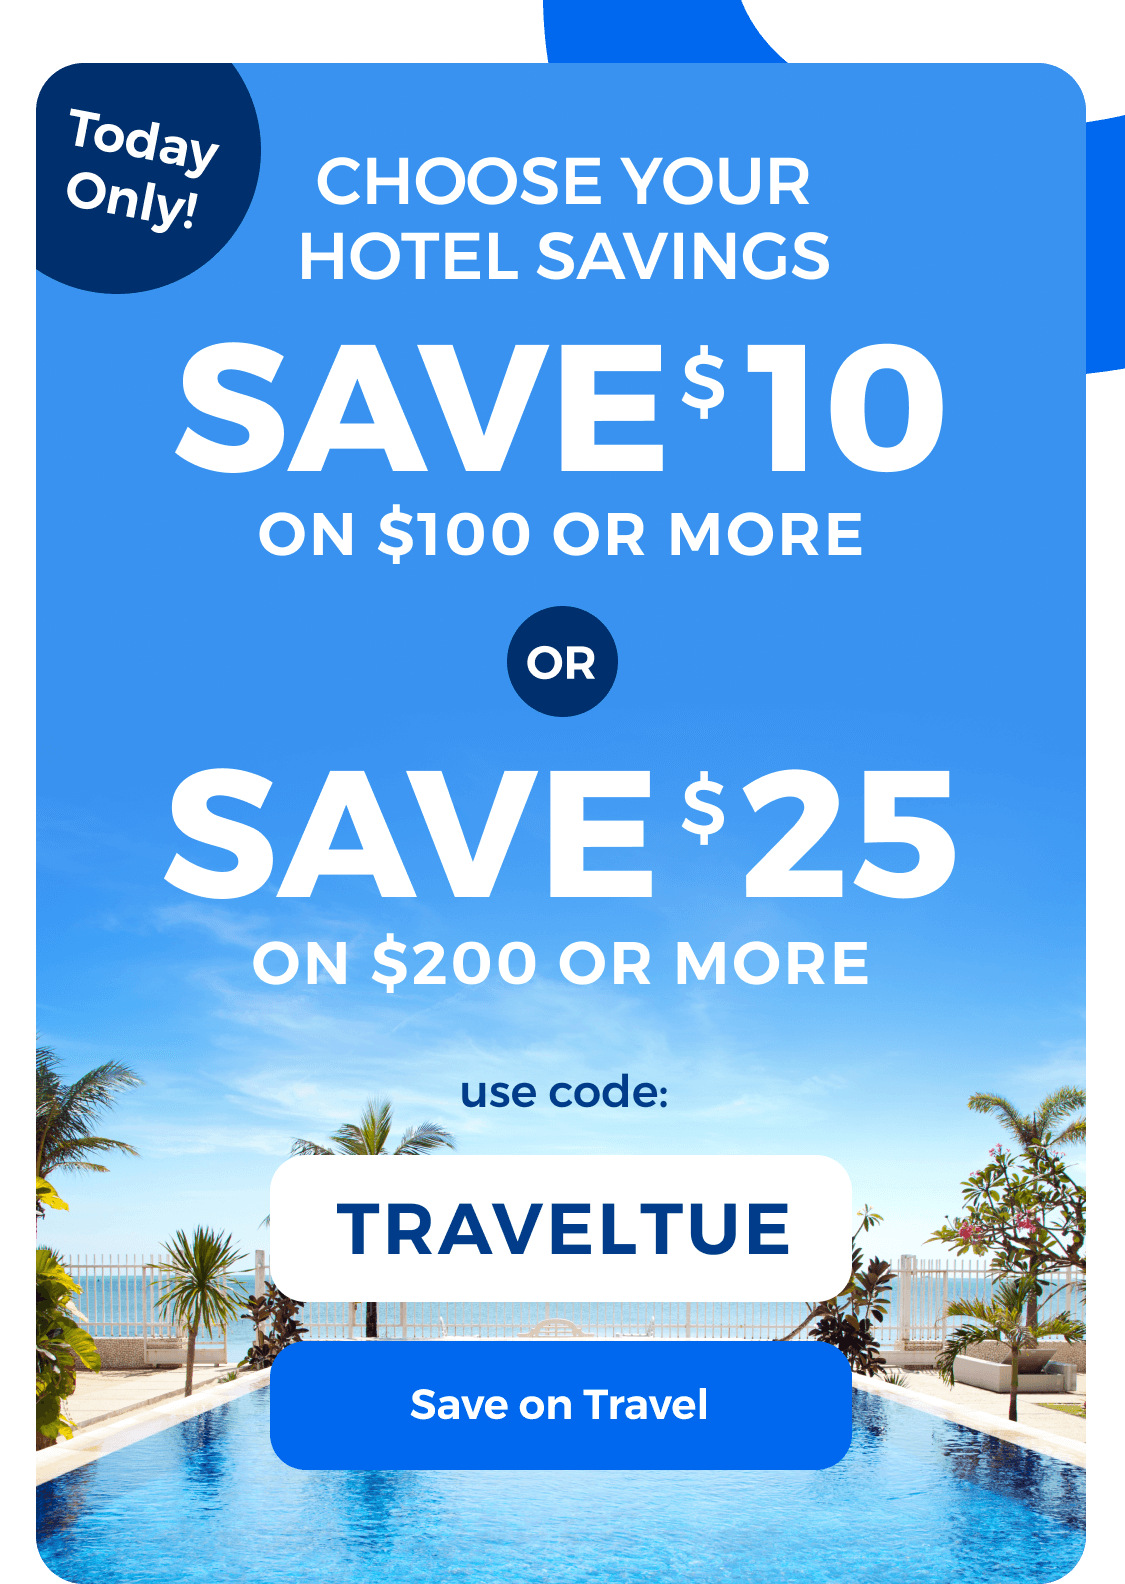 Travel Tuesday is here (with 25 off!) Priceline